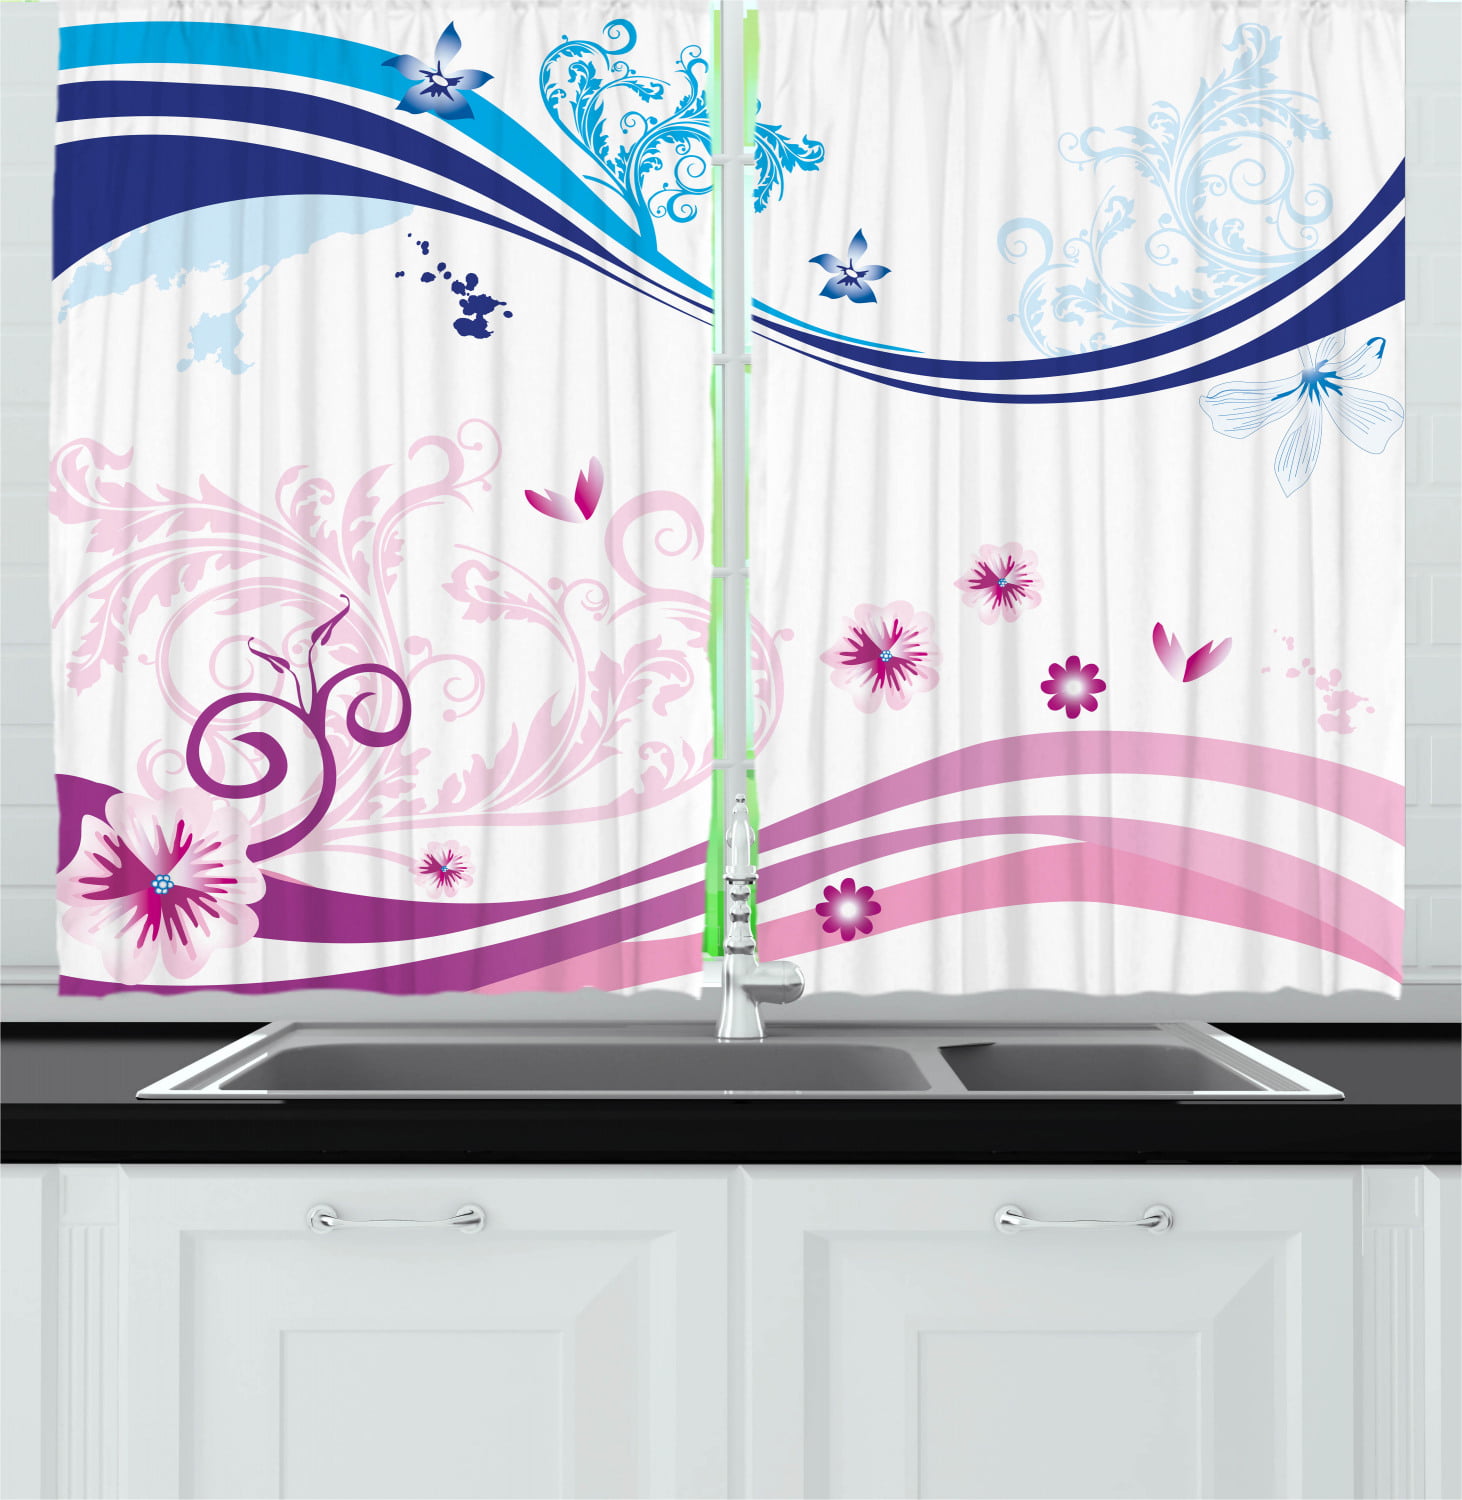 Gray Whale Dolphin Window Treatments for Kitchen Curtains 2 Panels 55X39 Inches 